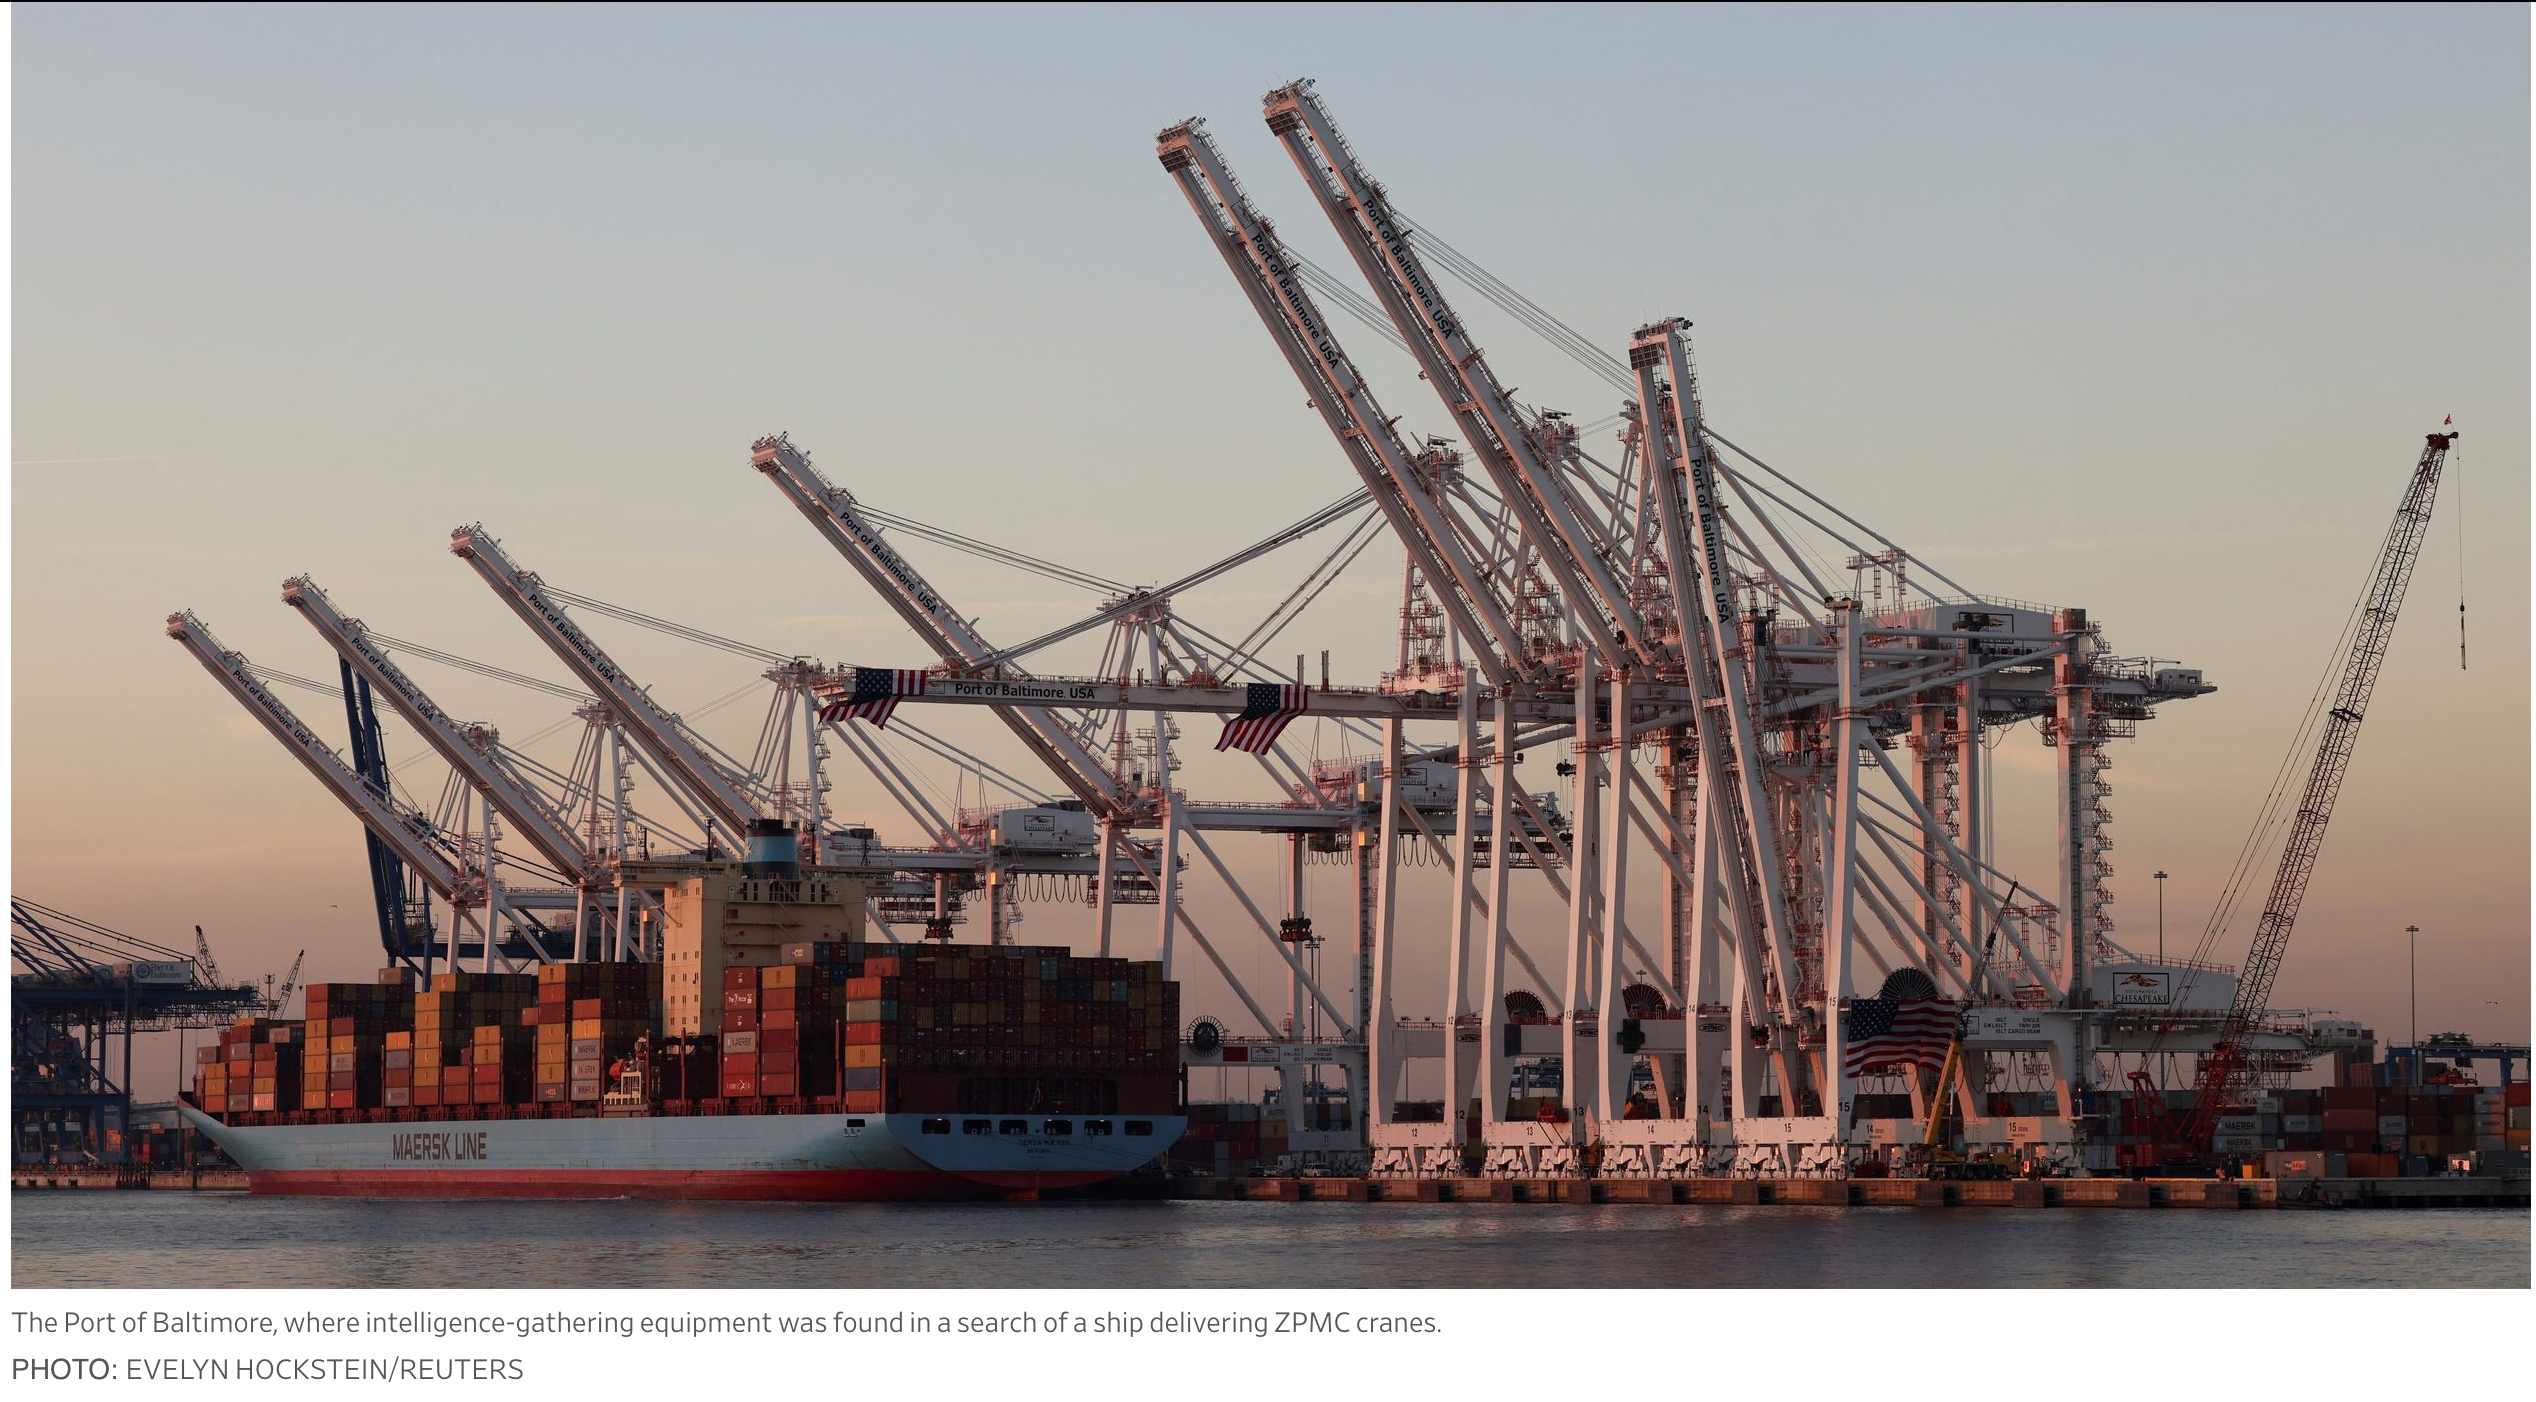 Pentagon Sees Giant Cargo Cranes As Possible Chinese Spying Tools